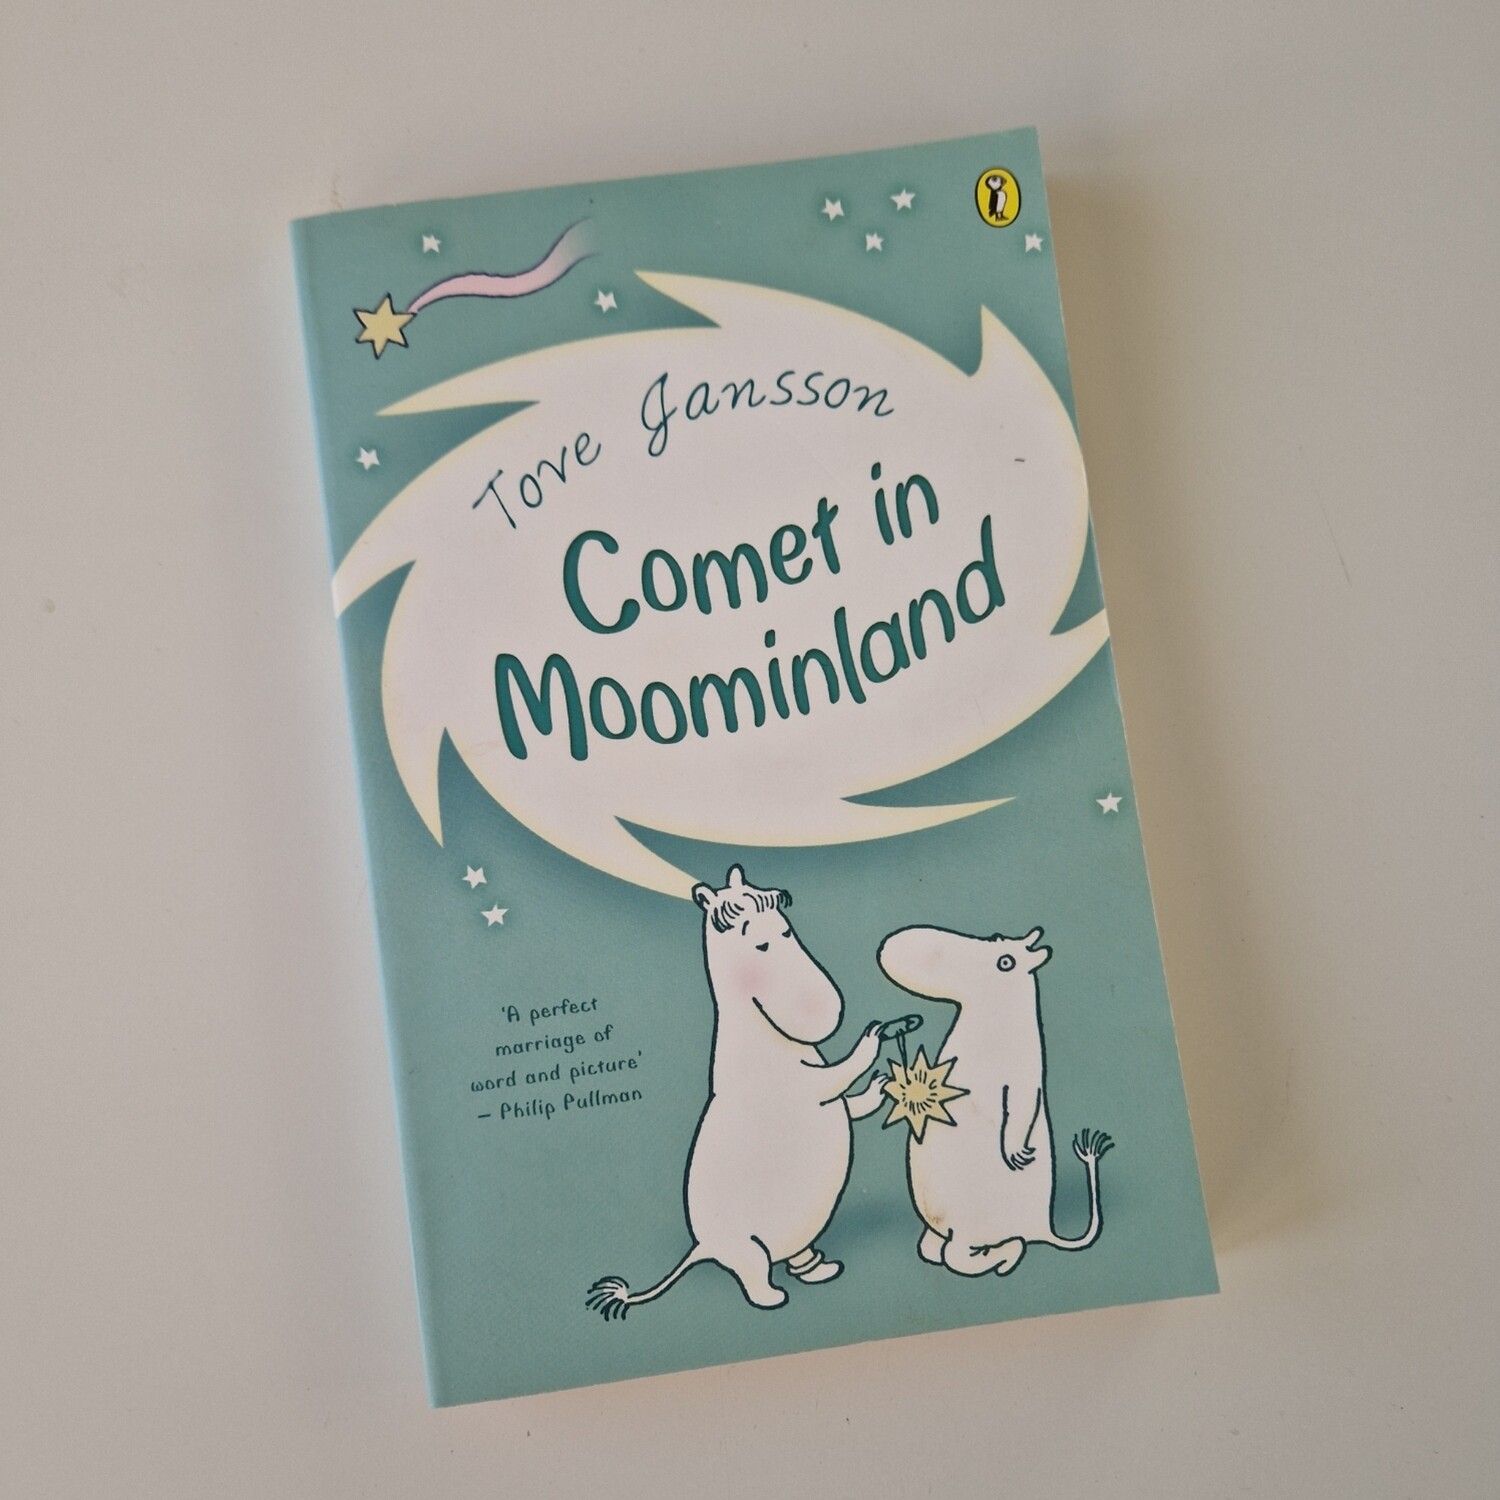 Moomins - Comet in Moominland - made from a paperback book